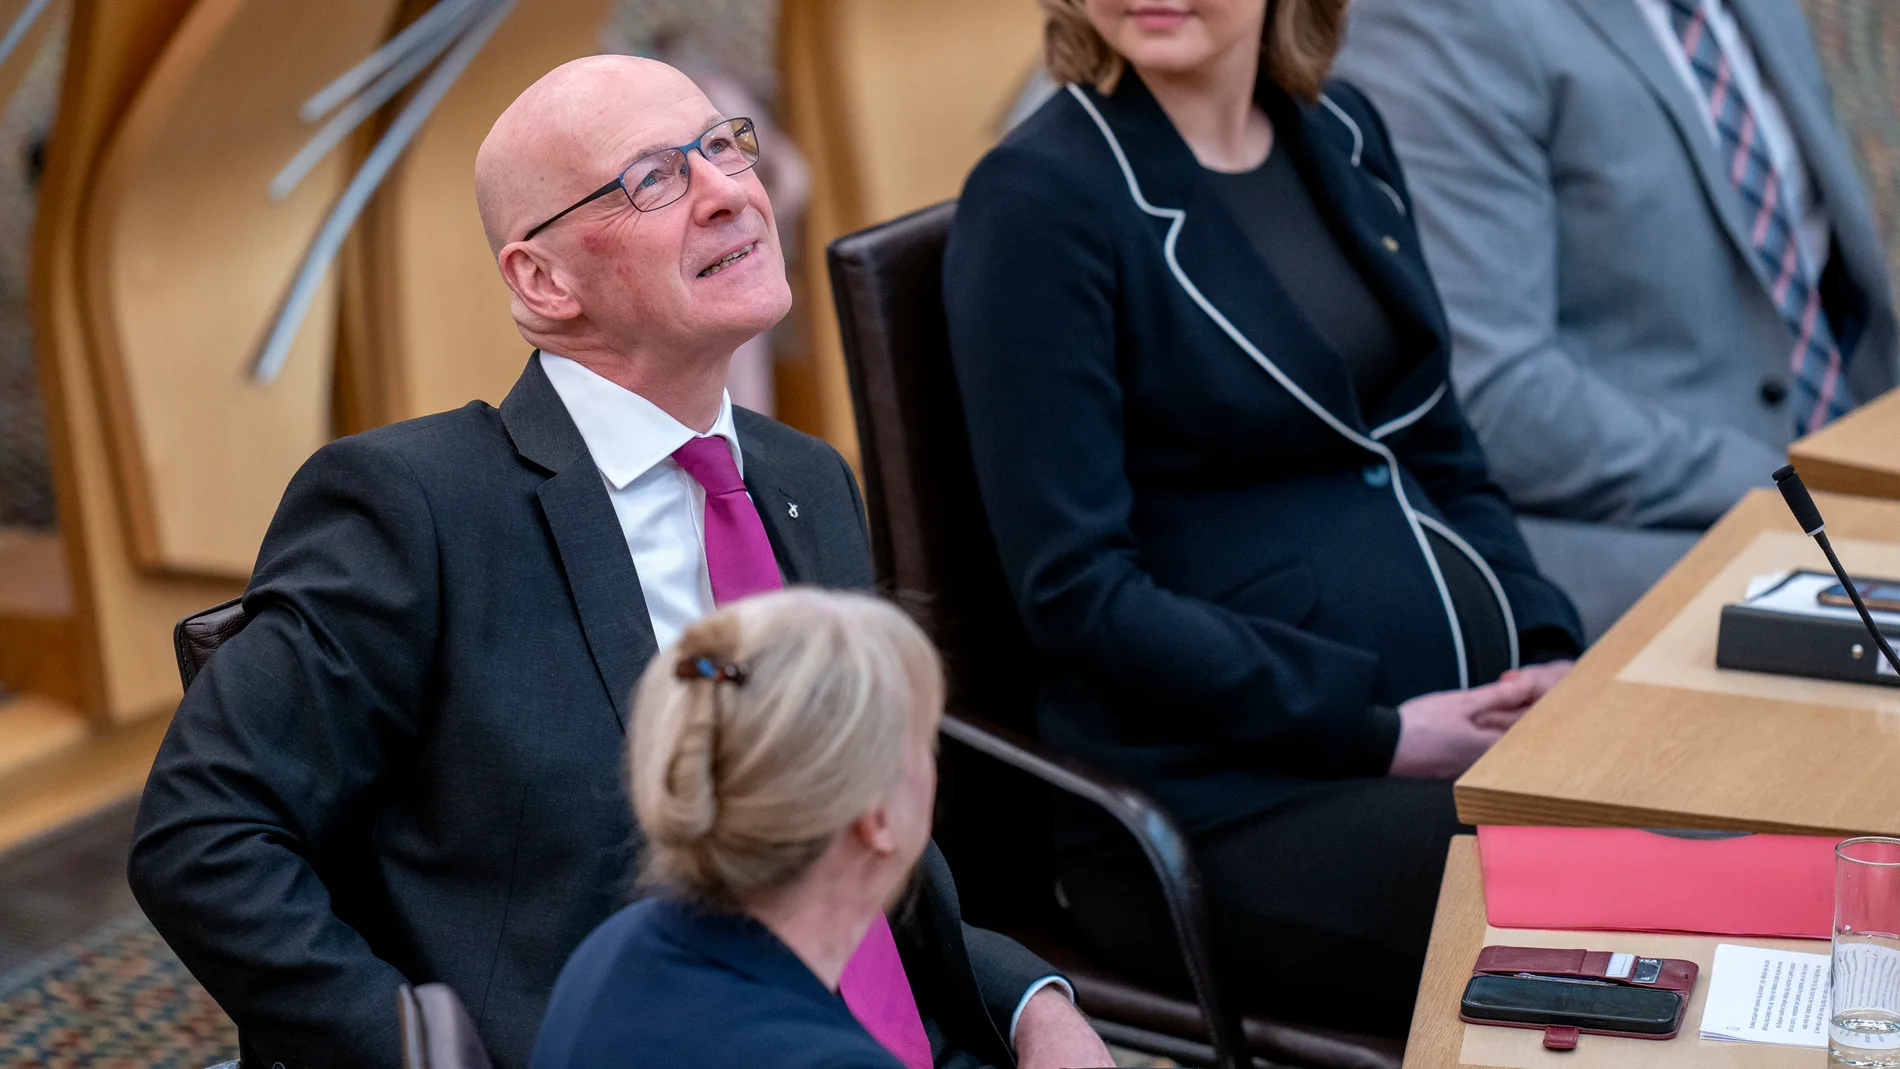 John Swinney in the main chamber after being voted in as First Minister at the Scottish Parliament in Edinburgh, Tuesday May 7, 2024. (Jane Barlow/PA via AP)